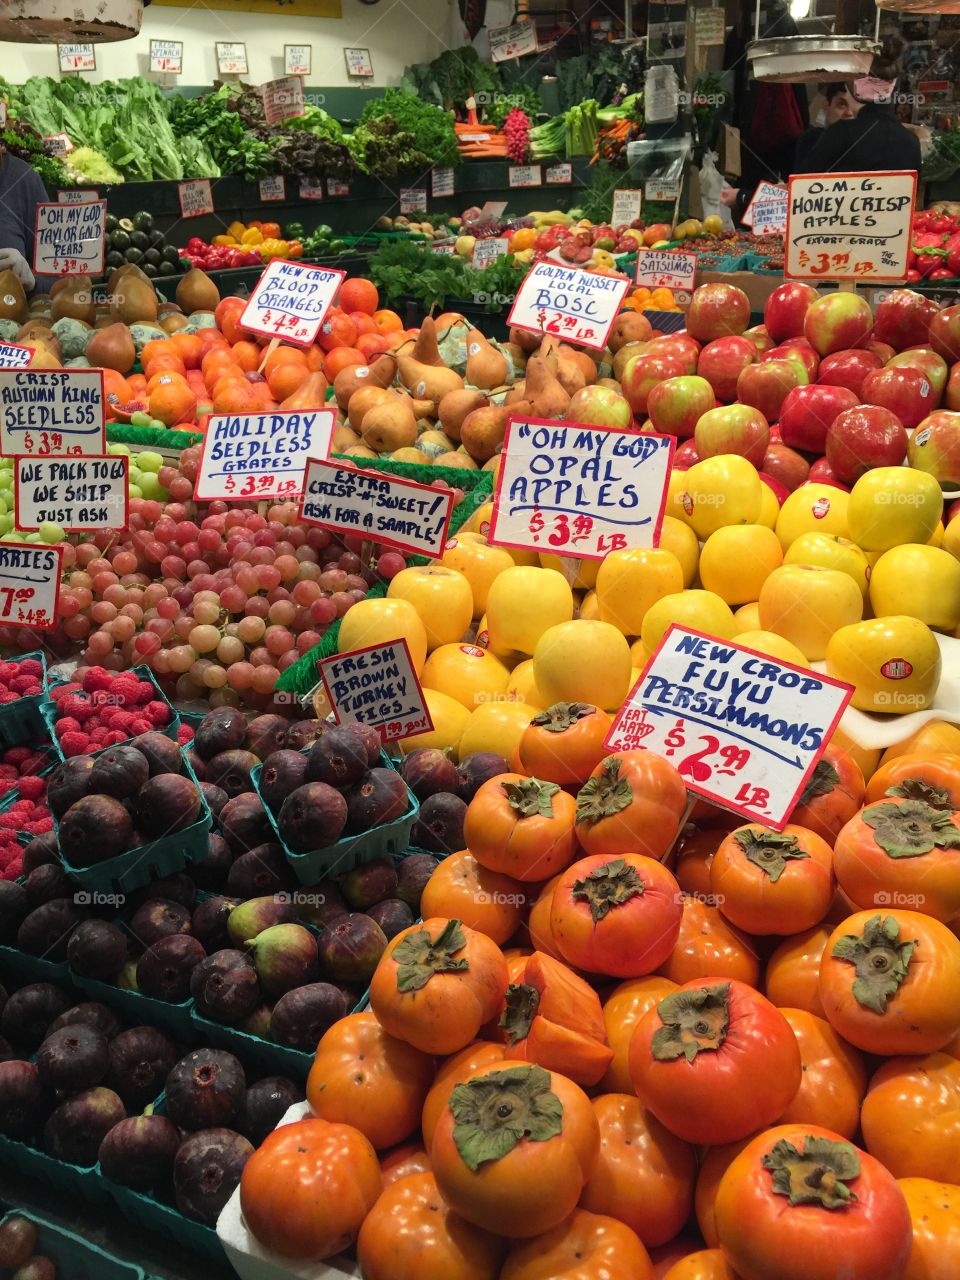 Pike place market fruit stand